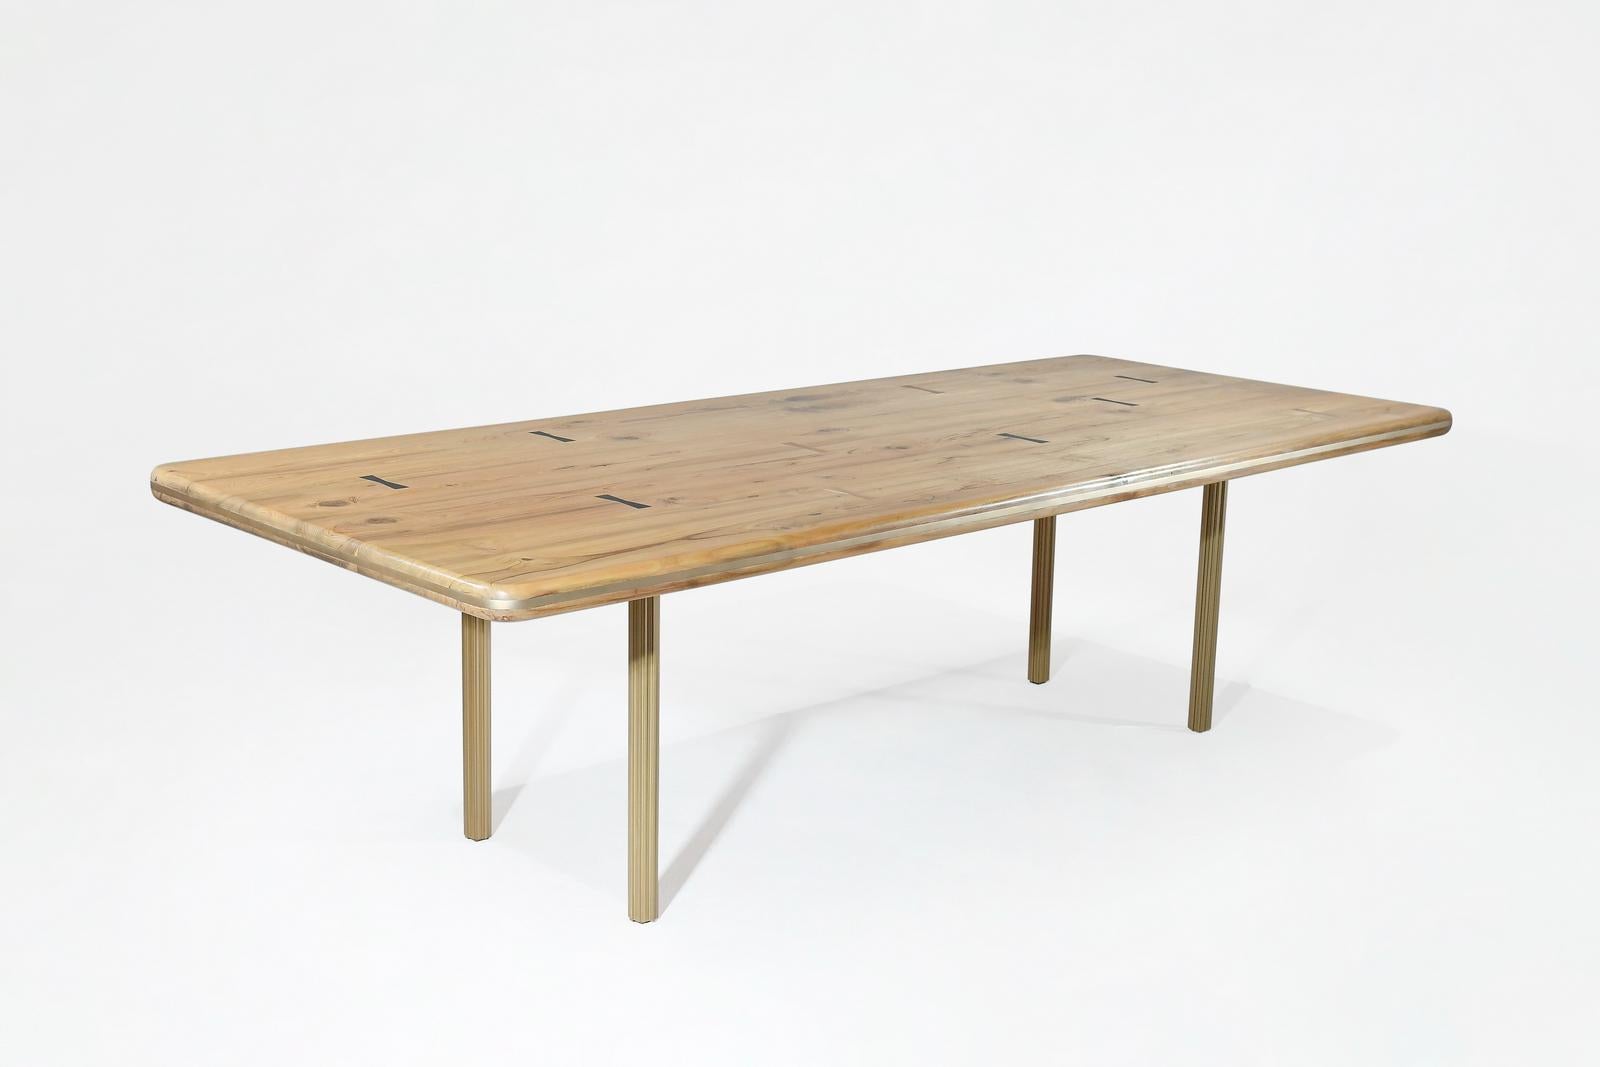 We created a custom dining table for our customer in Bangkok. This dining table, made from bleached reclaimed teakwood, is a little different from what we usually offer. They desired a blend of classic and modern aesthetics, with a focus on